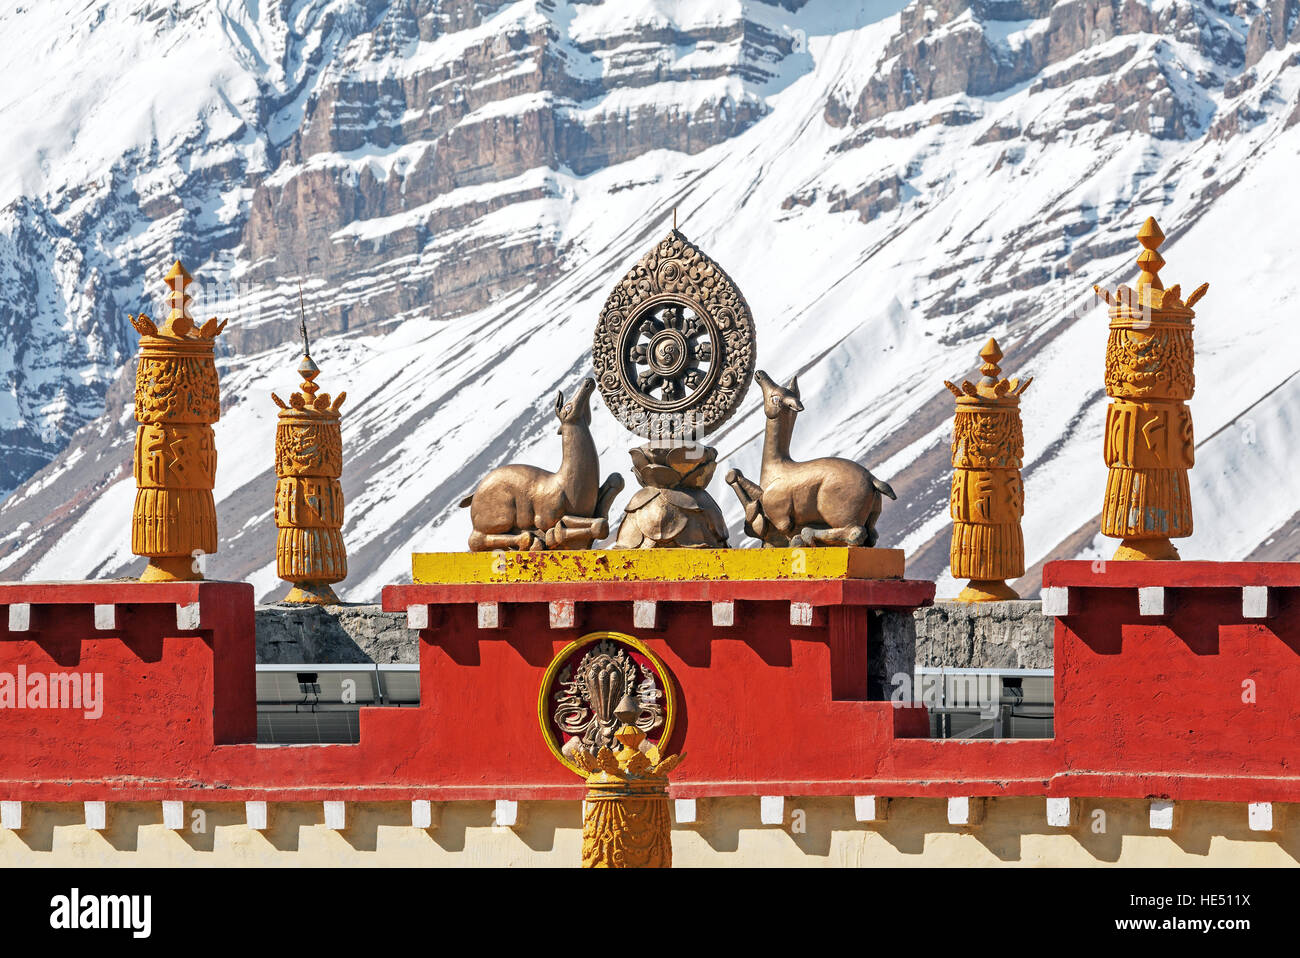 Dharma Wheel on the roof of a Tibetan Buddhist temple on the background of snowy mountains. Stock Photo